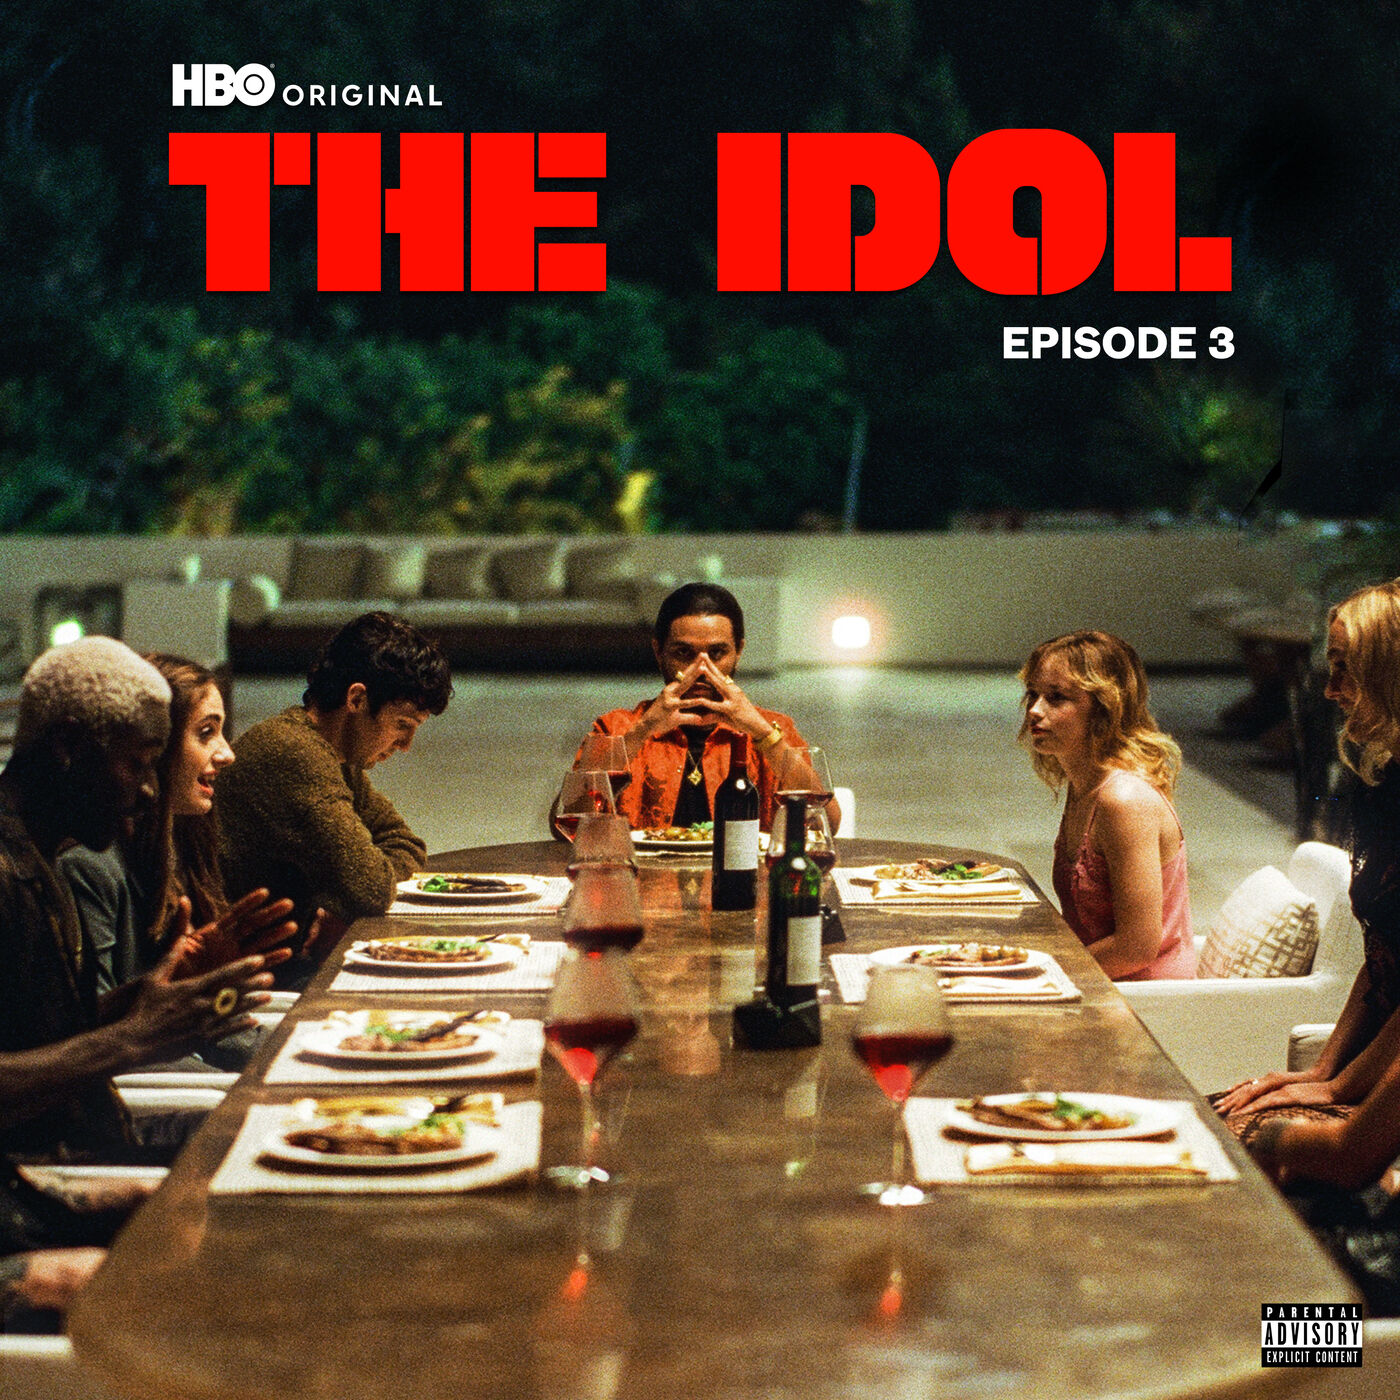 The Weeknd – The Idol Episode 3 (Music from the HBO Original Series)Ⓔ【44.1kHz／16bit】美国区-OppsUpro音乐帝国